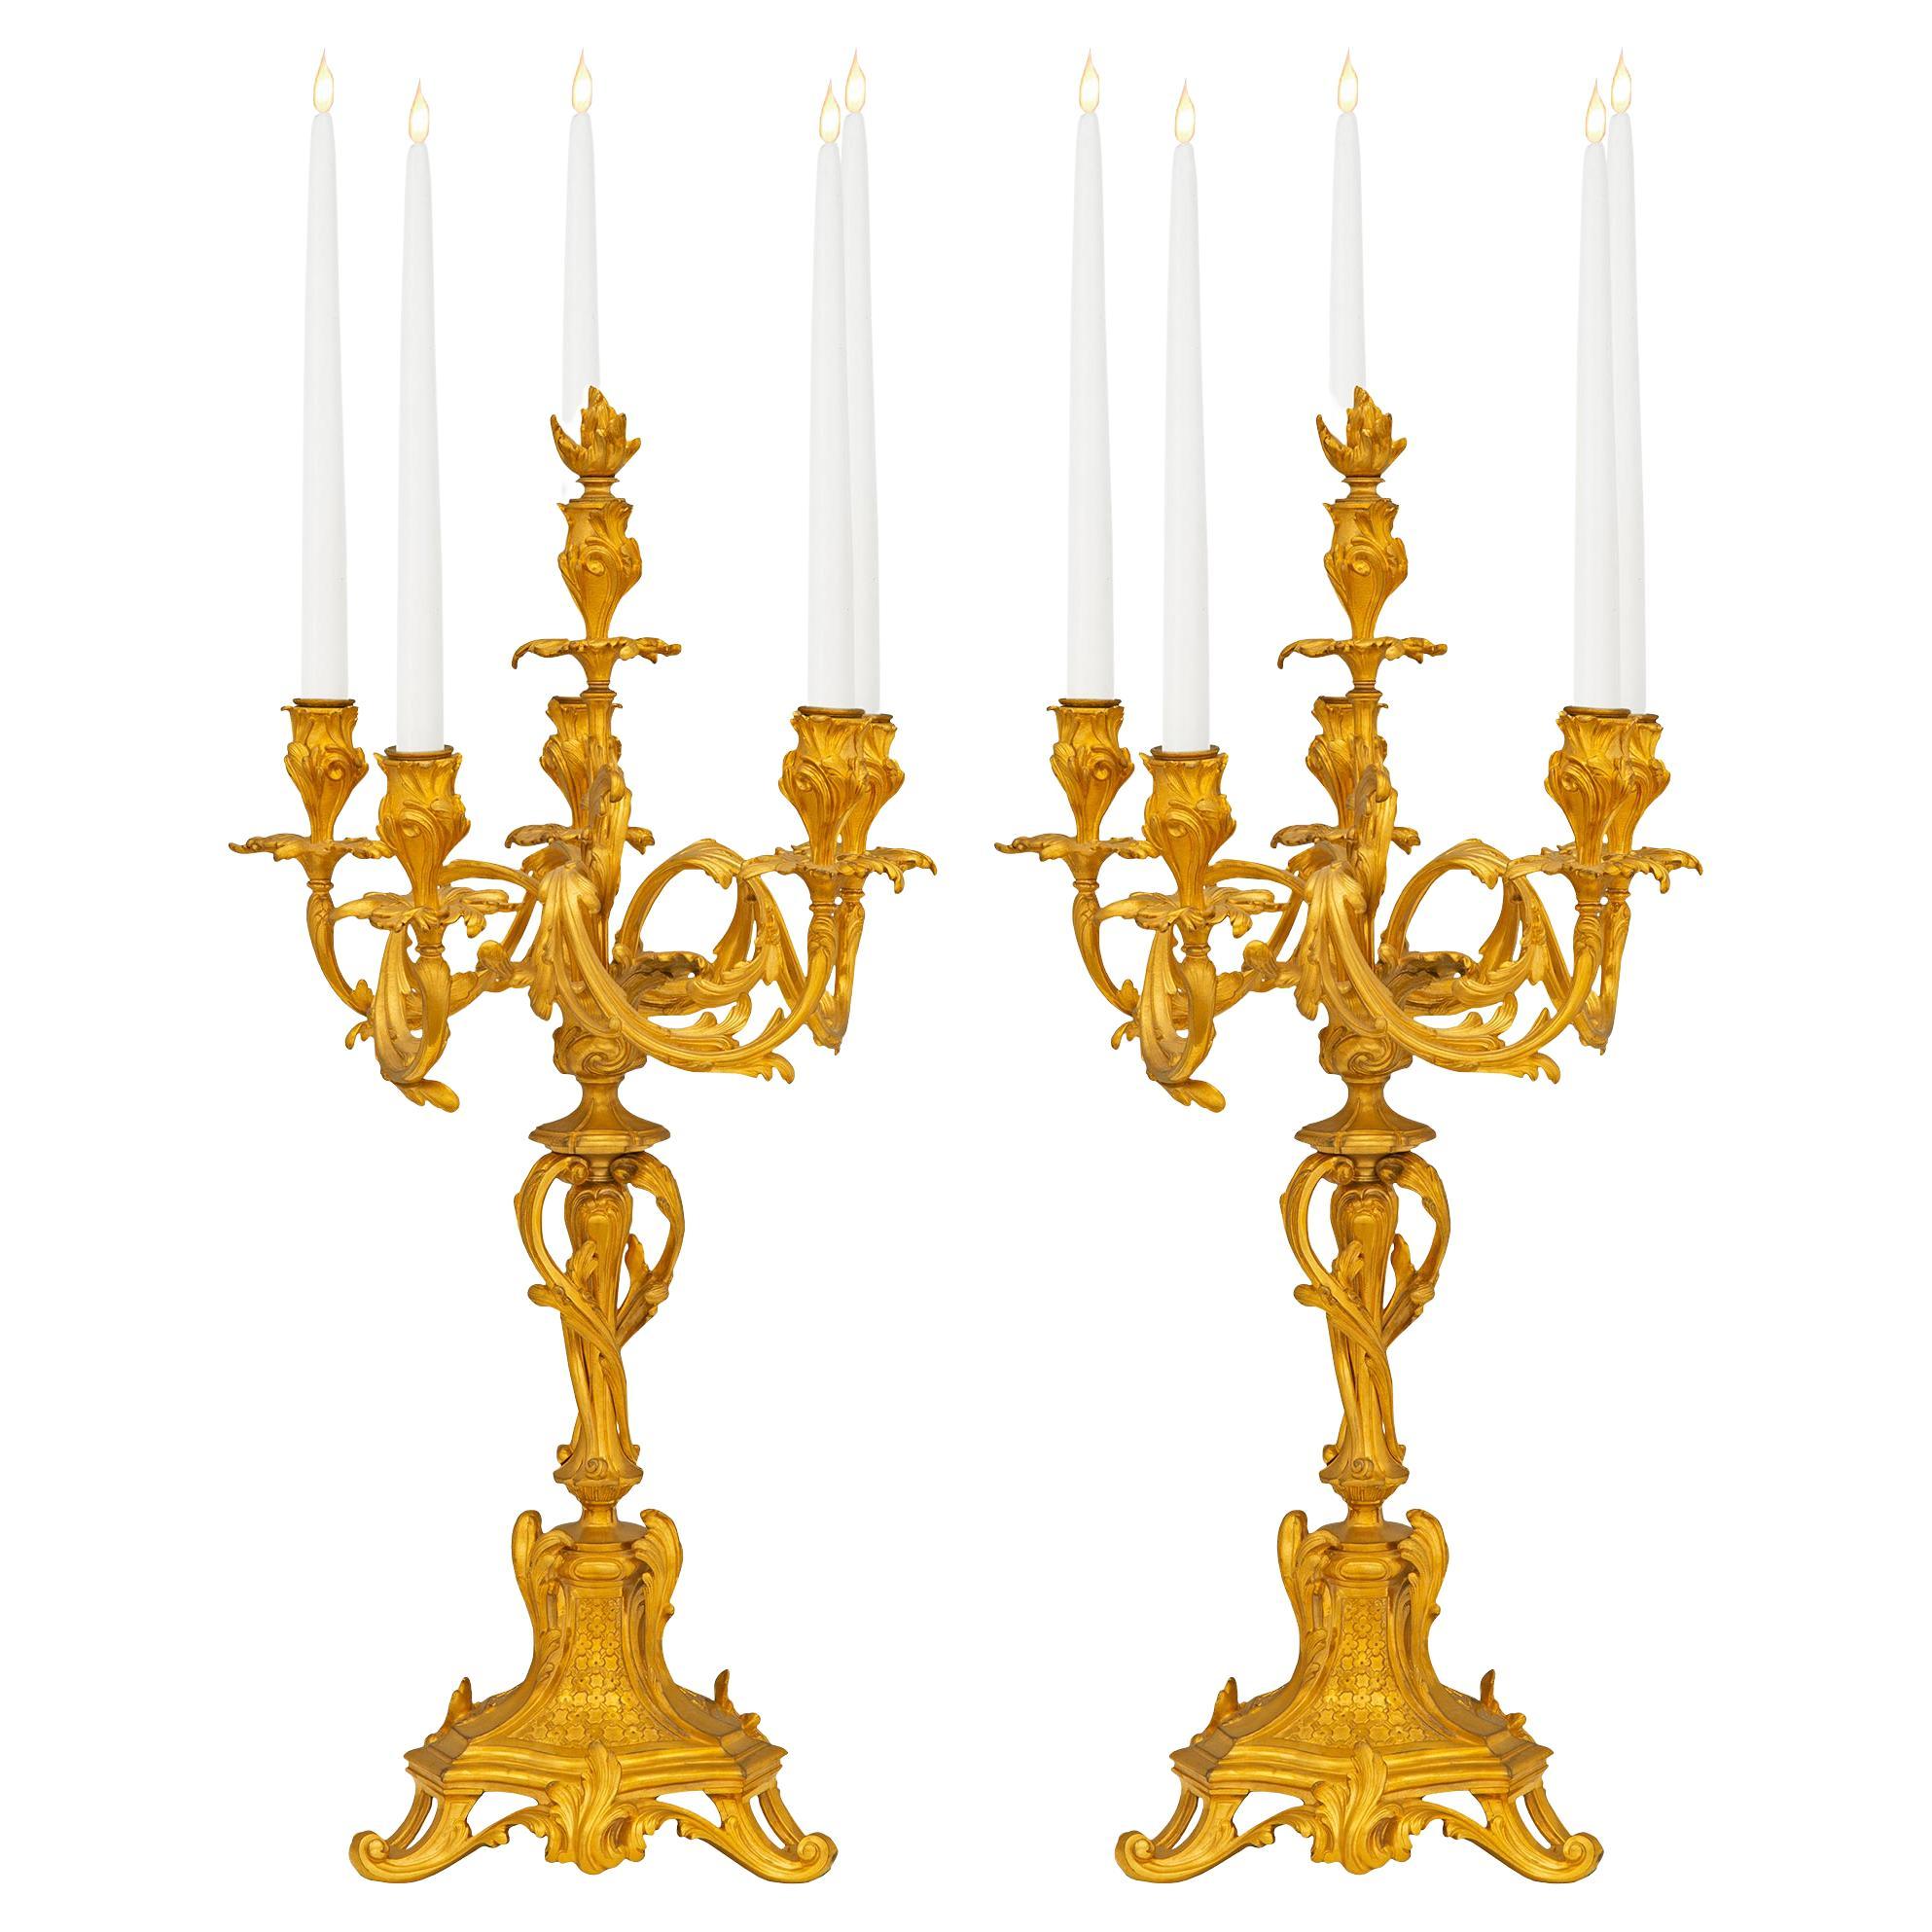 Pair of French Mid-19th Century Louis XV Style Five-Light Ormolu Candelabras